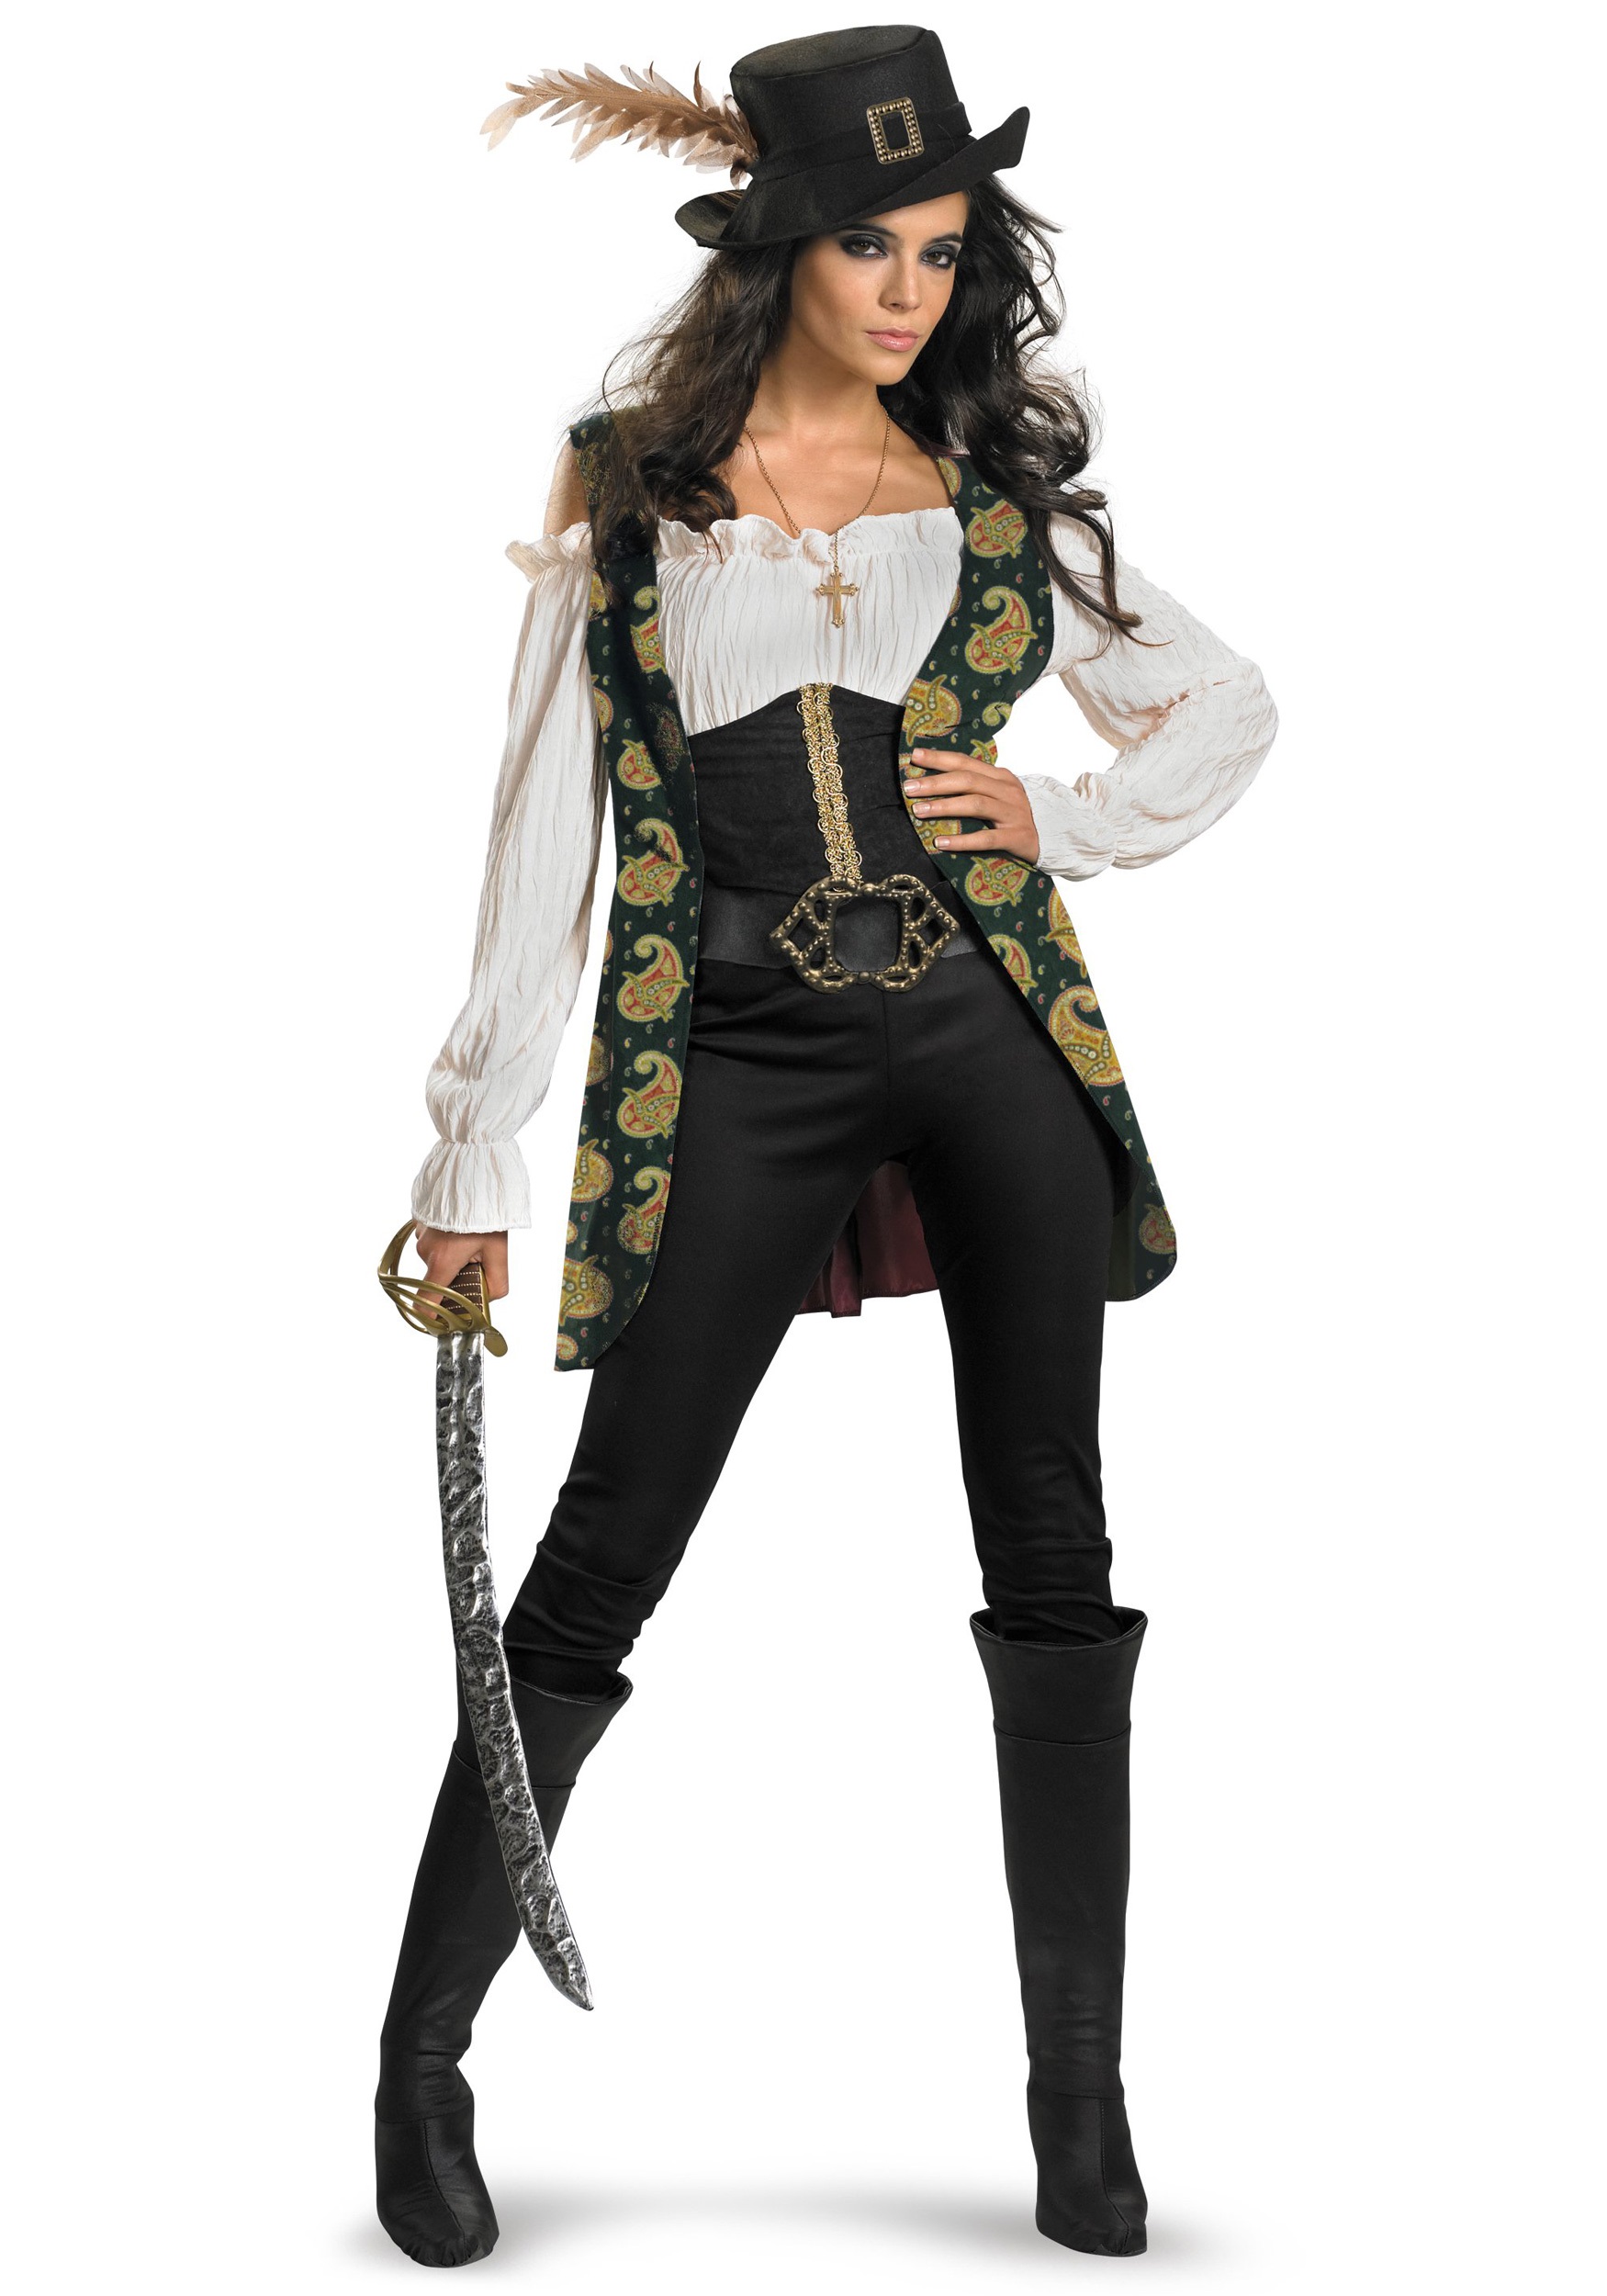 Deluxe Angelica Costume is a detailed version of the one Penelope Cruz wore...